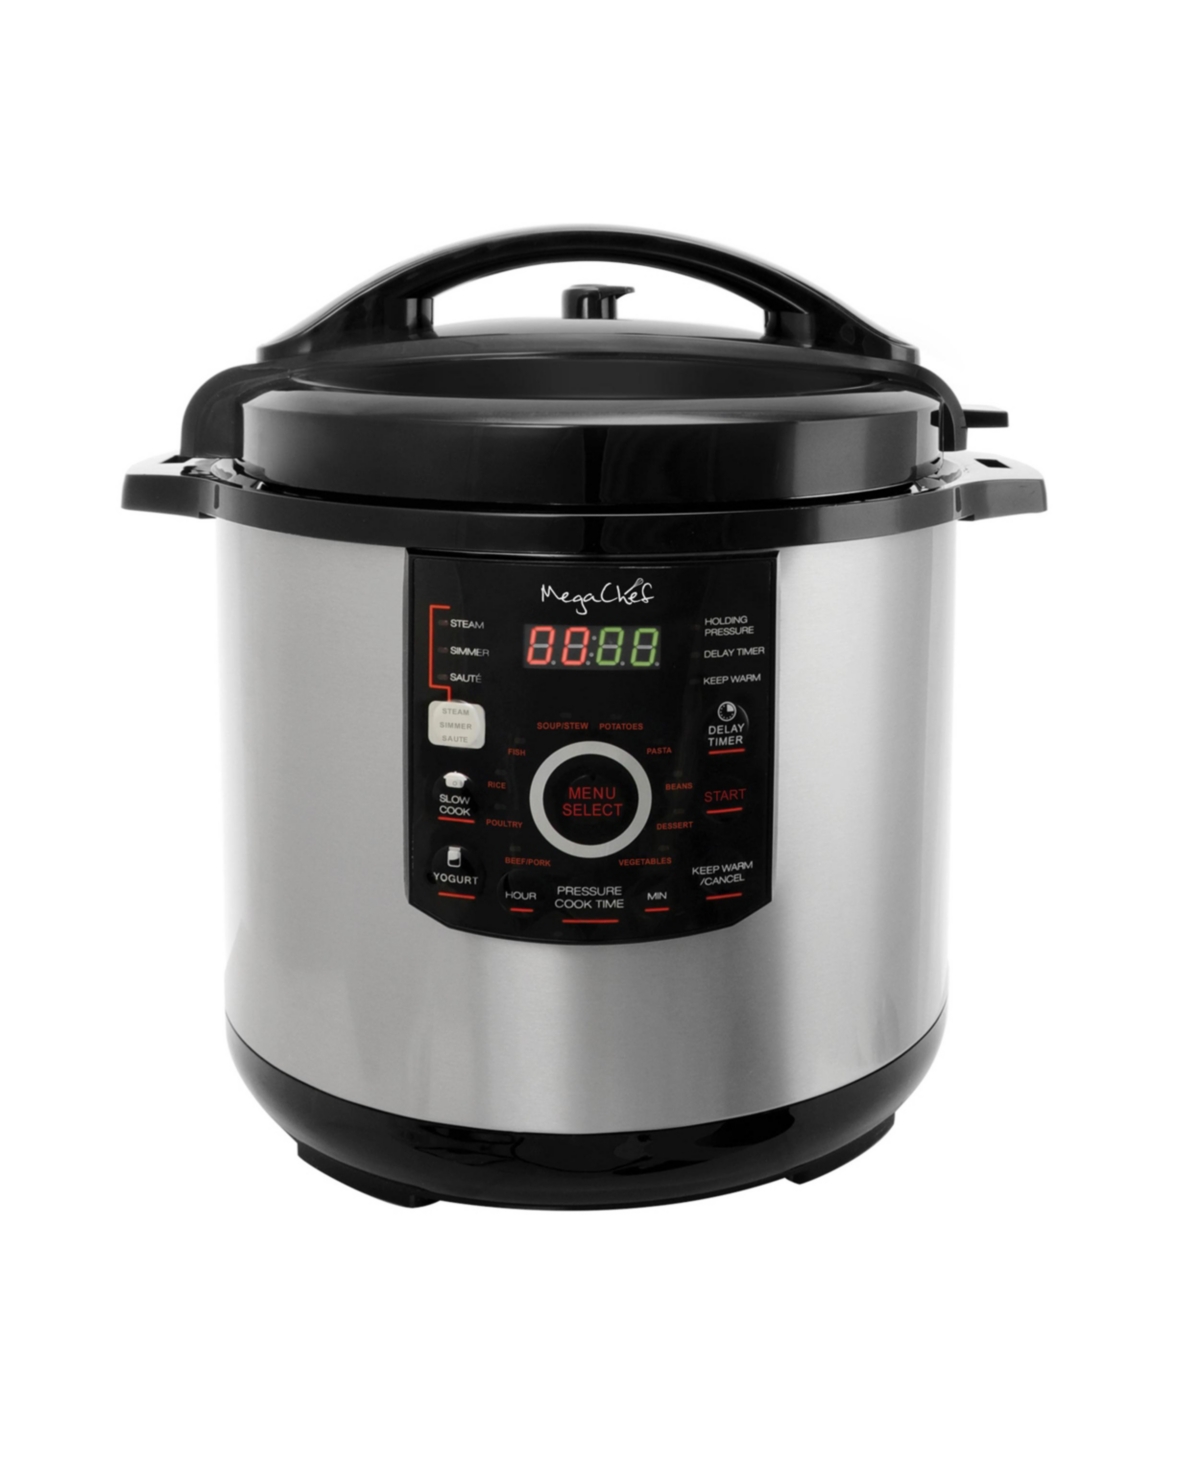 12 Qt. Steel Digital Pressure Cooker with 15 Presets and Glass Lid - Silver